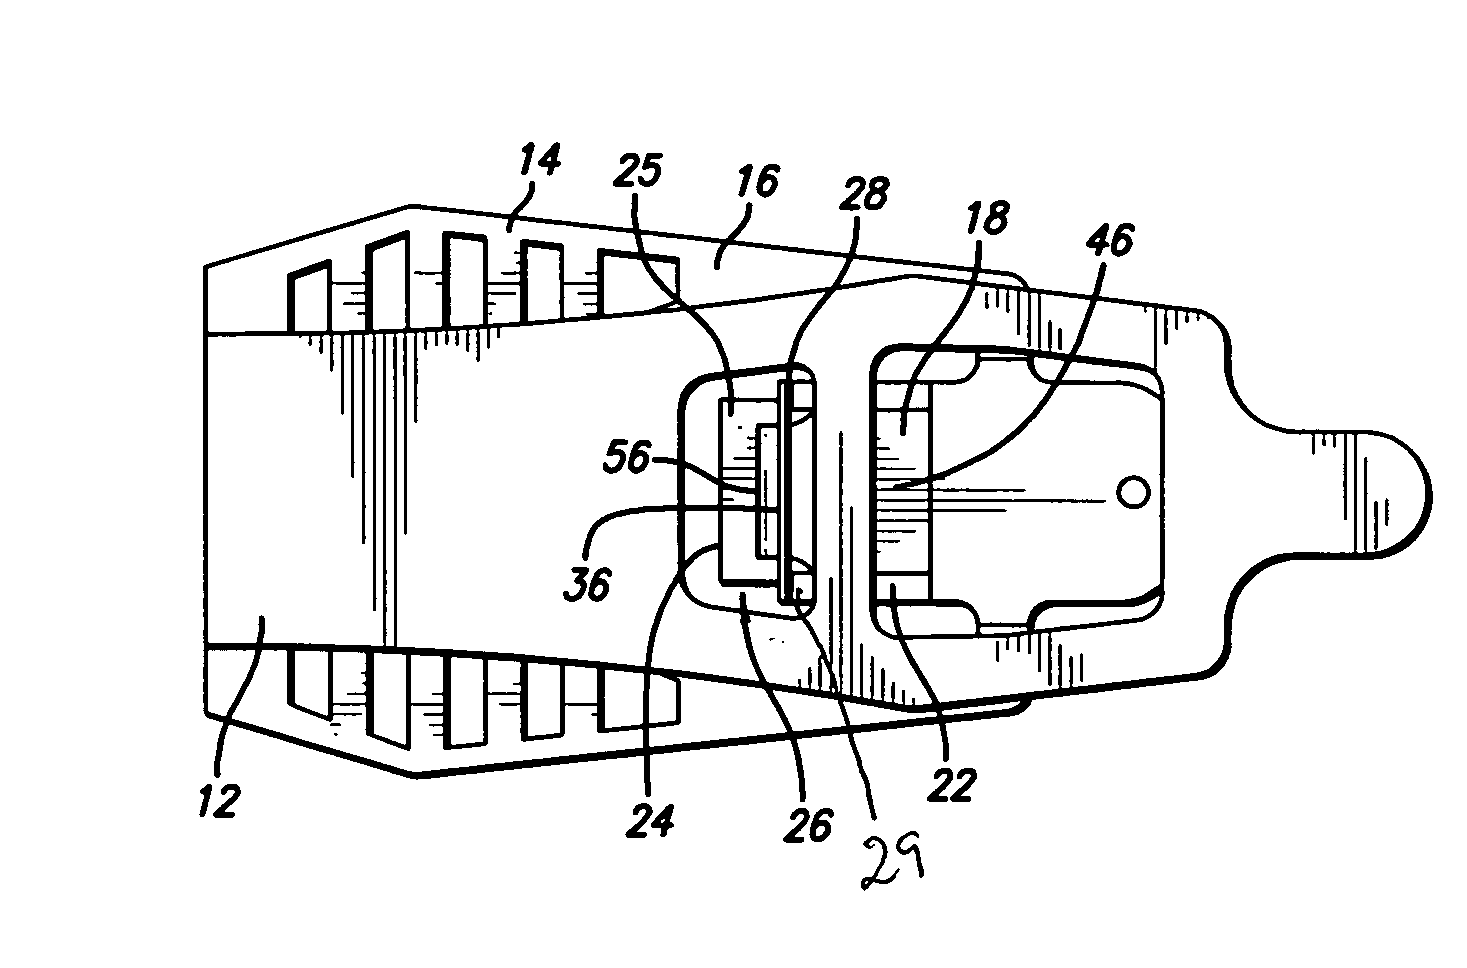 Suspension limiter with proximally cantilevered limiter members